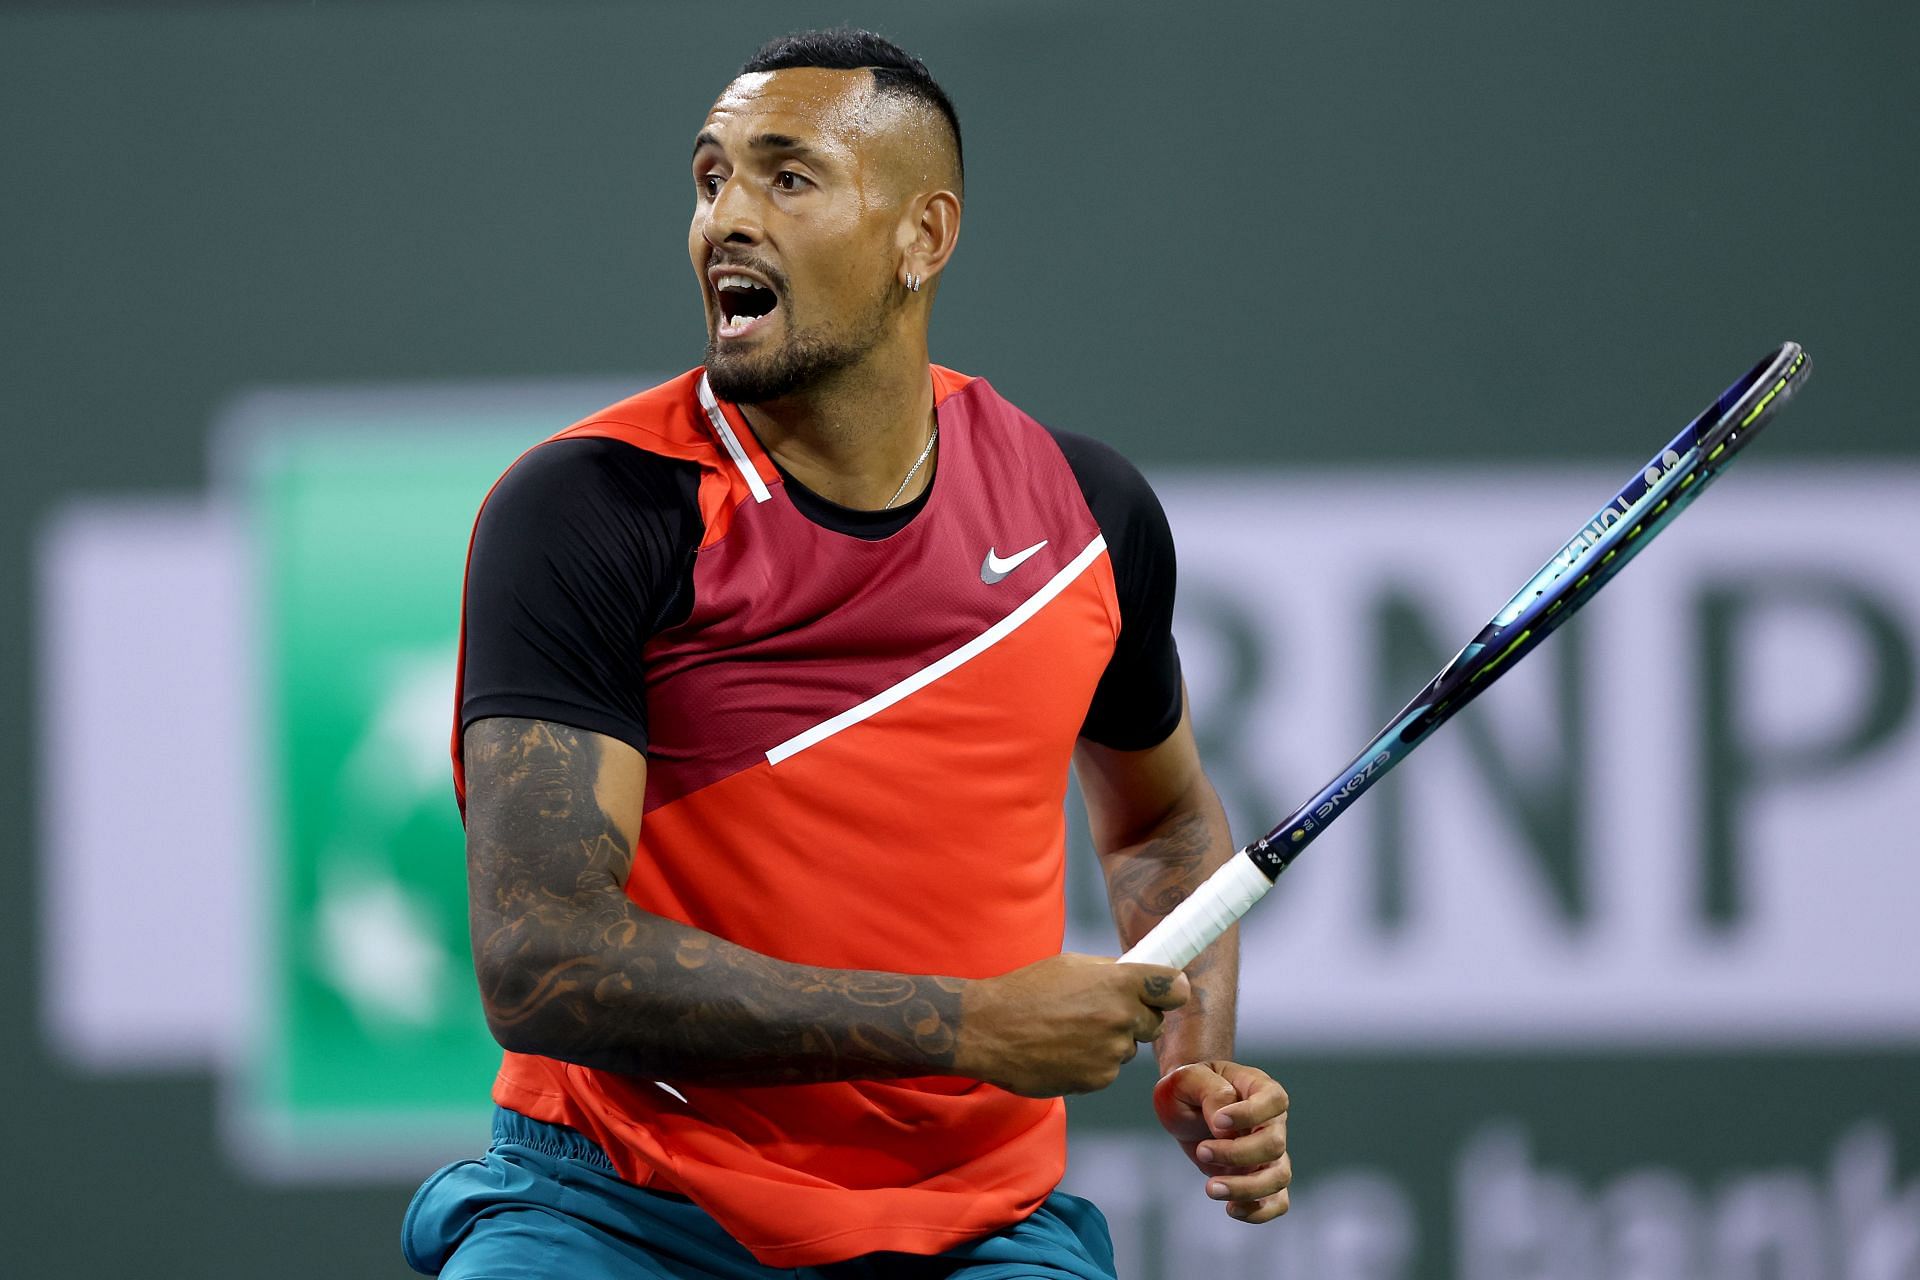 Nick Kyrgios will take on Jannik Sinner in the last 16 of the Indian Wells Masters